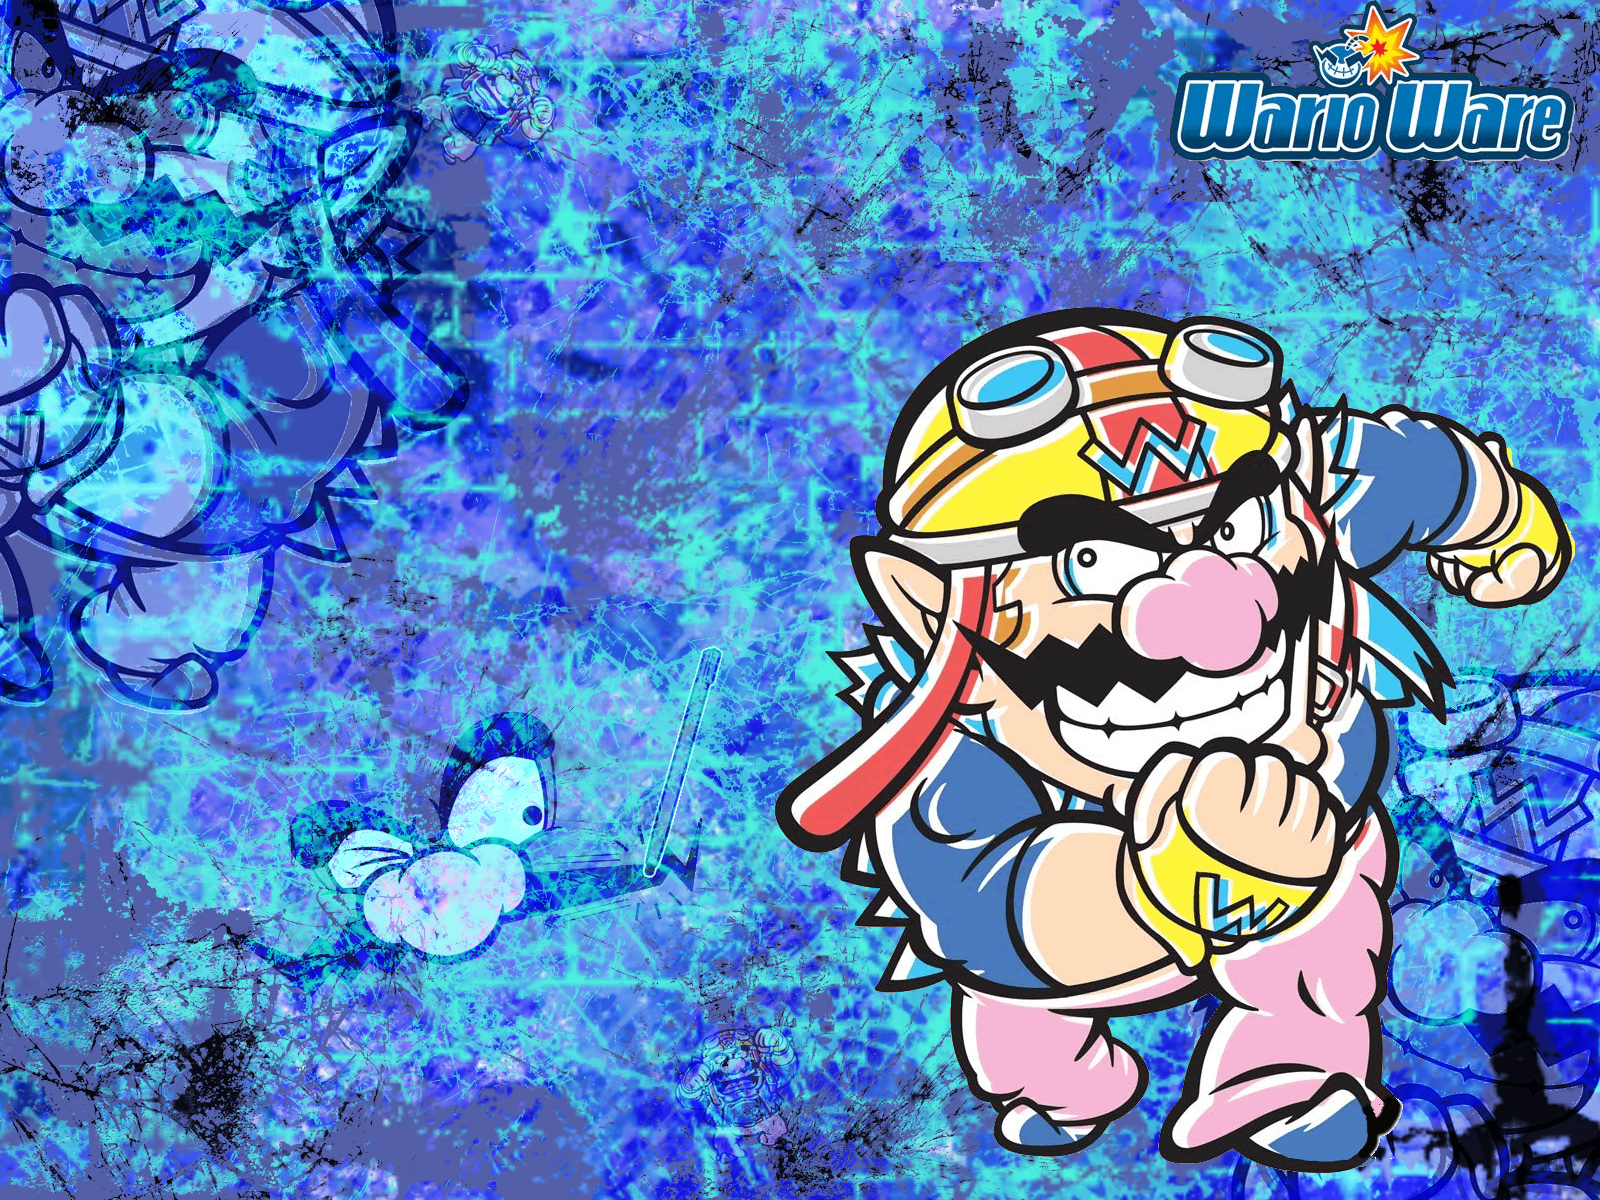 Game And Wario Games Daily Games - Wario Ware Background , HD Wallpaper & Backgrounds